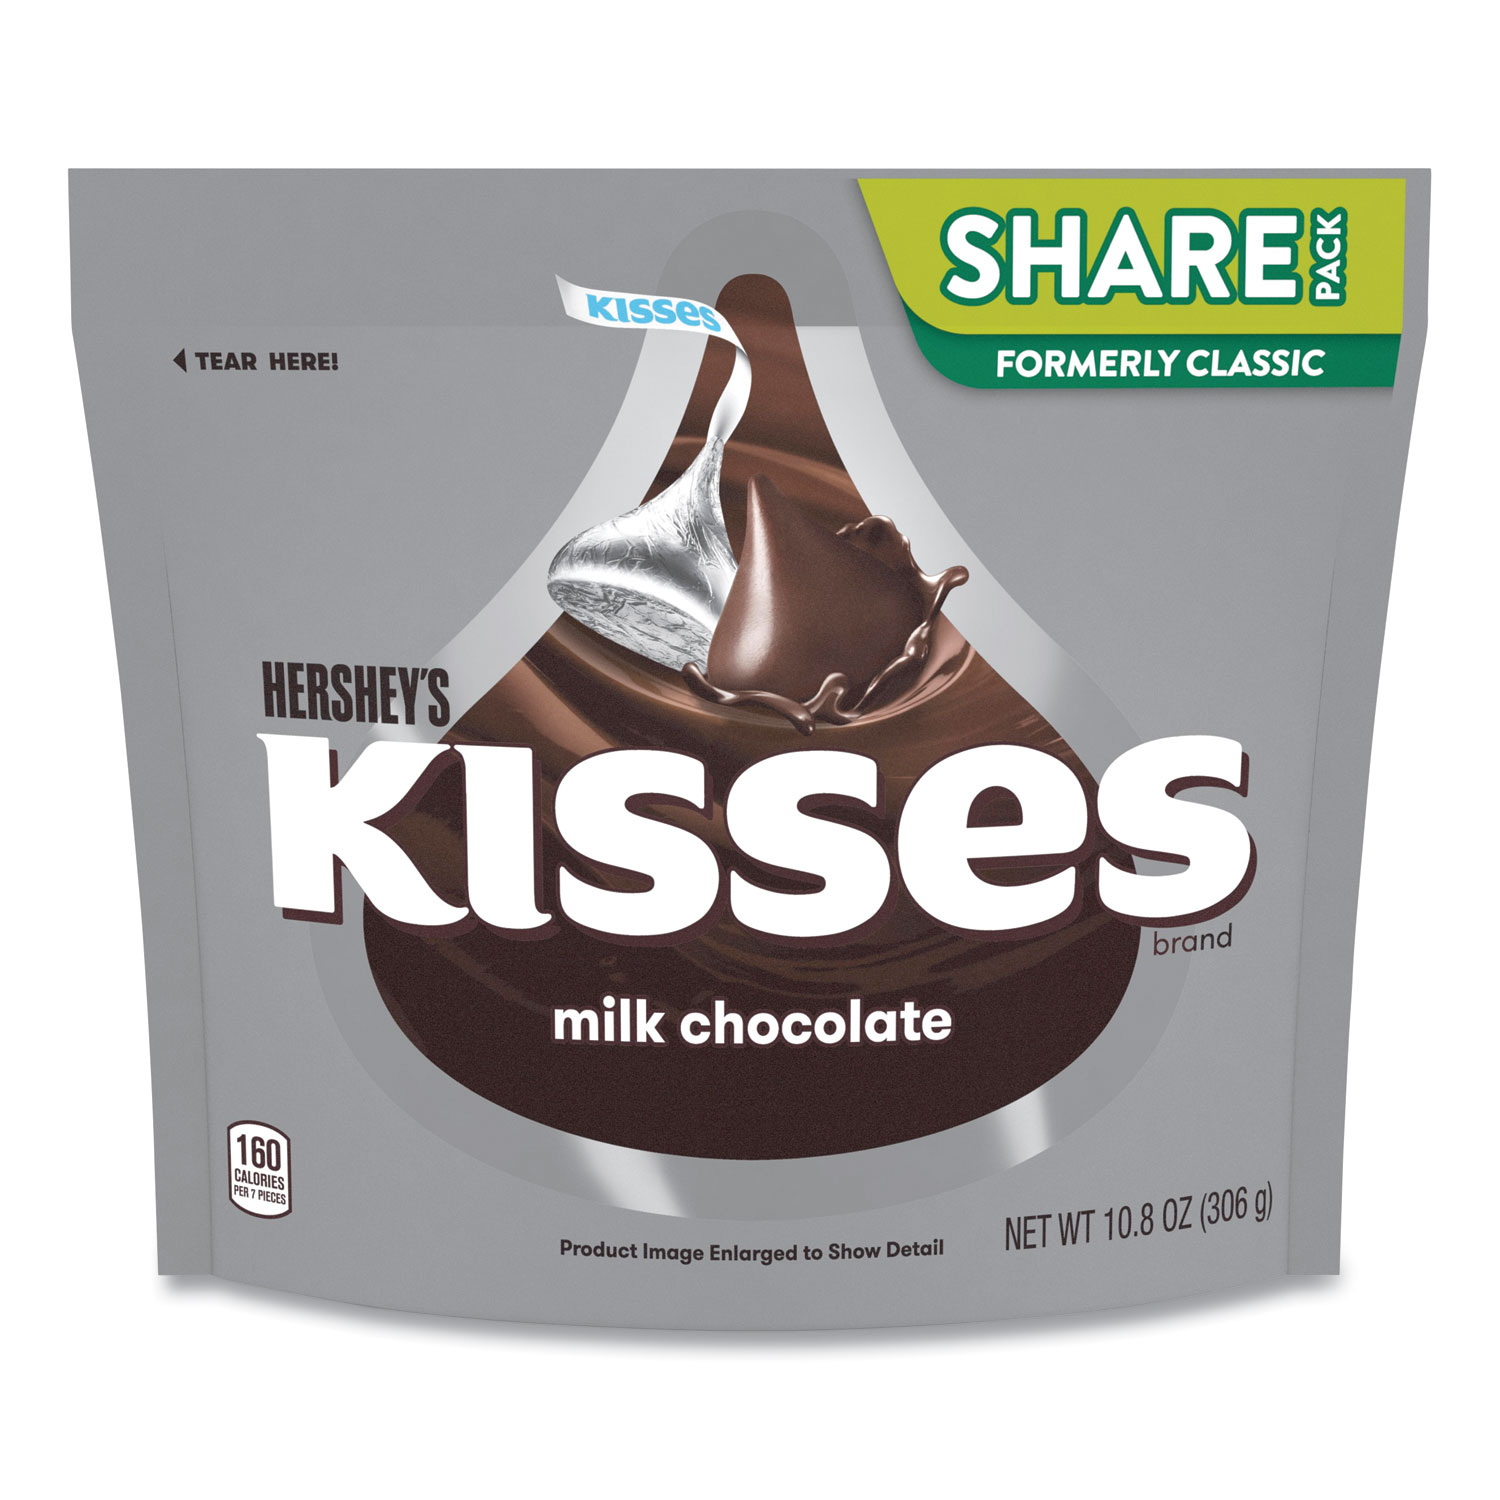  Hershey's 14058 KISSES, Milk Chocolate Share Pack, Silver Wrappers, 10.8 oz Bag, 3 Bags/Pack, Free Delivery in 1-4 Business Days (GRR24600432) 